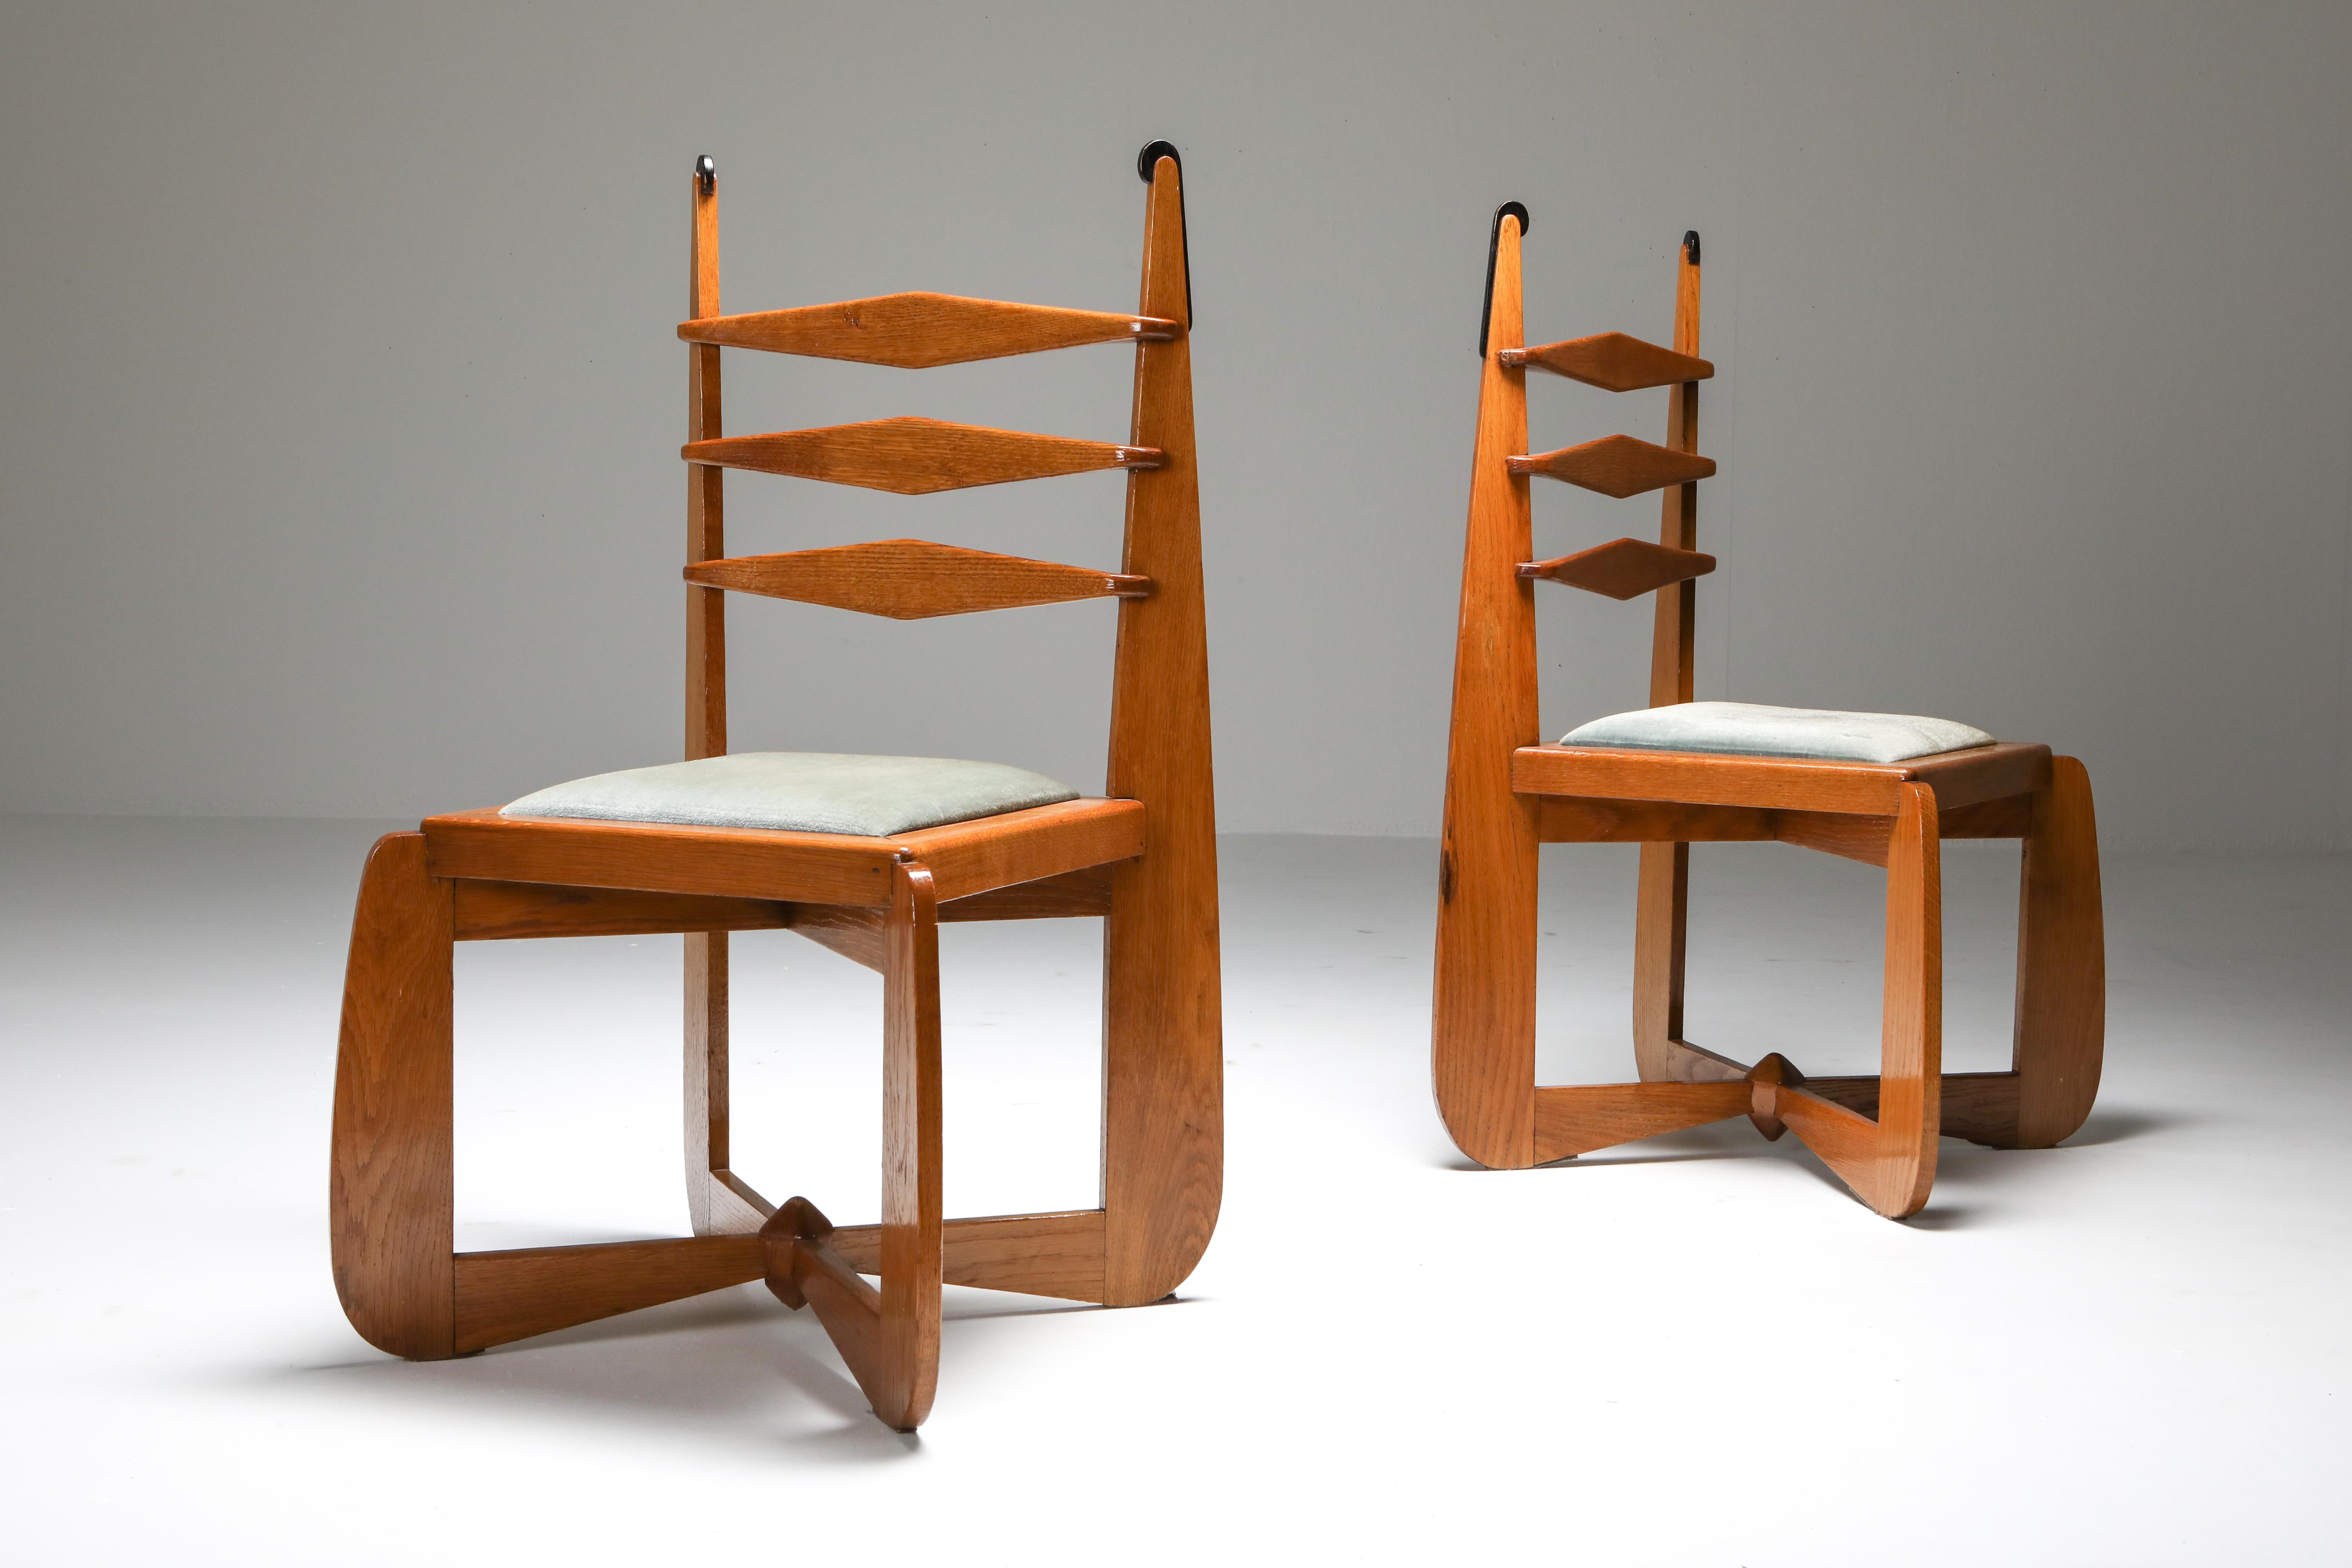 Oak set of expressive chairs in the style of Kramer and Hildo Krop, Netherlands 1930s

Amsterdam School set of six chairs, exuberant and sculptural, with ebonized tips.
The velvet upholstery was already on the chairs, ask about our in house